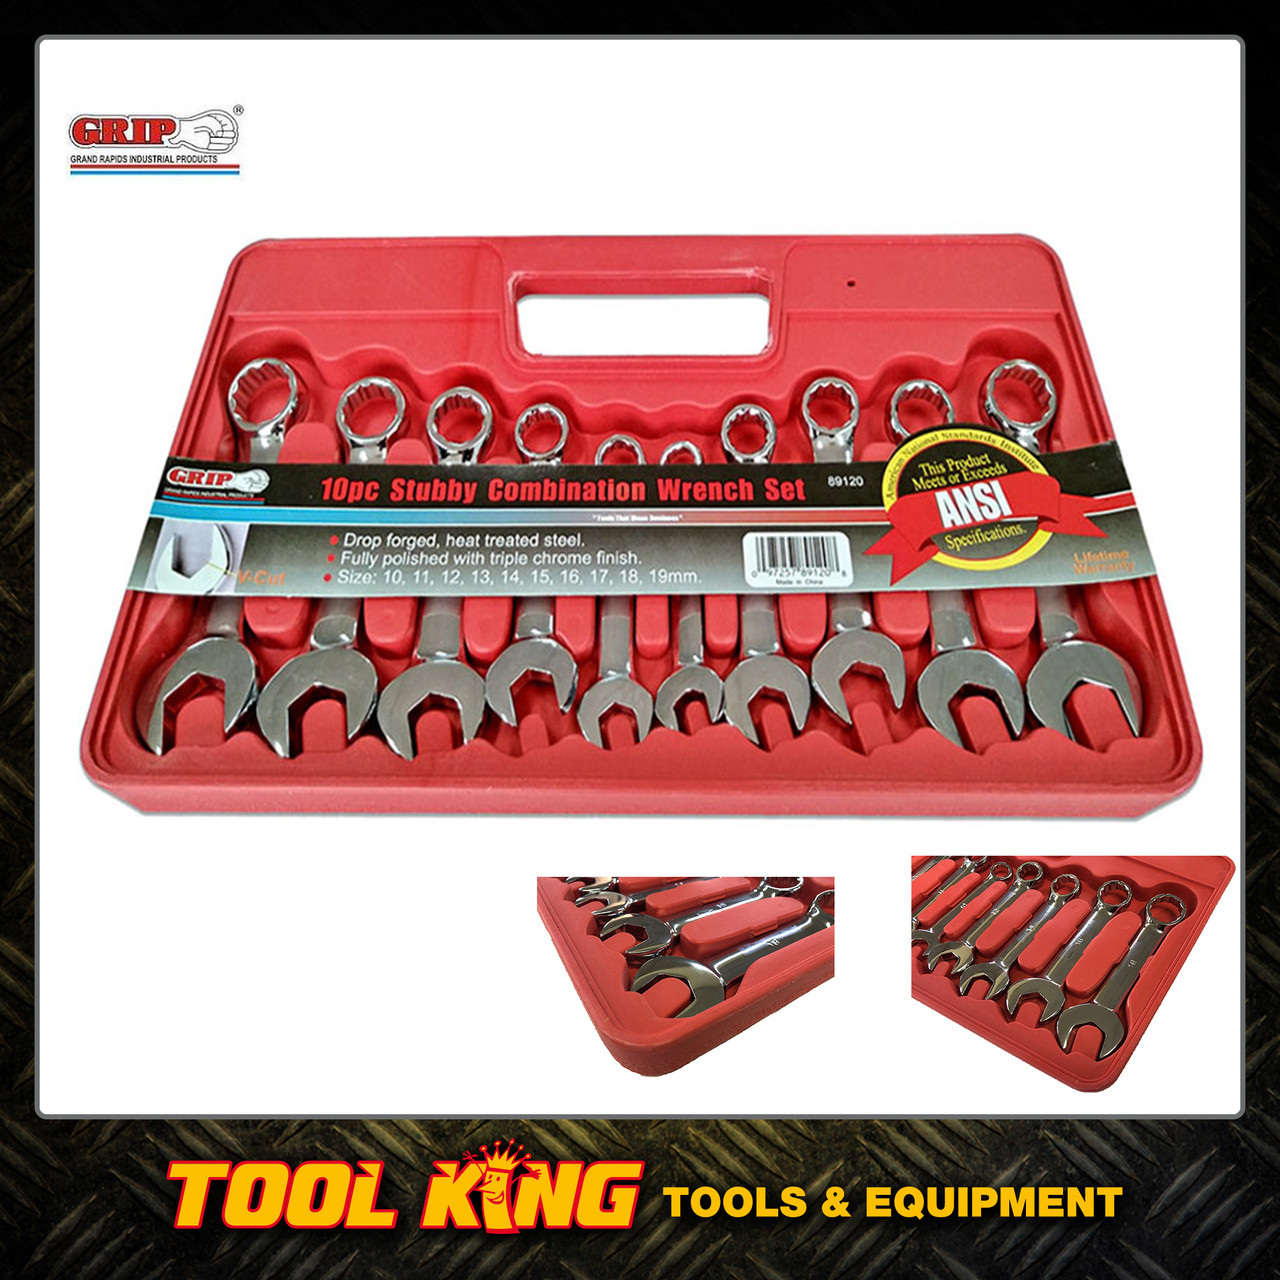 KING 7PC STUBBY COMBINATION WRENCH OPEN RING SPANNER SET SAE HAND TOOL BRAND NEW 